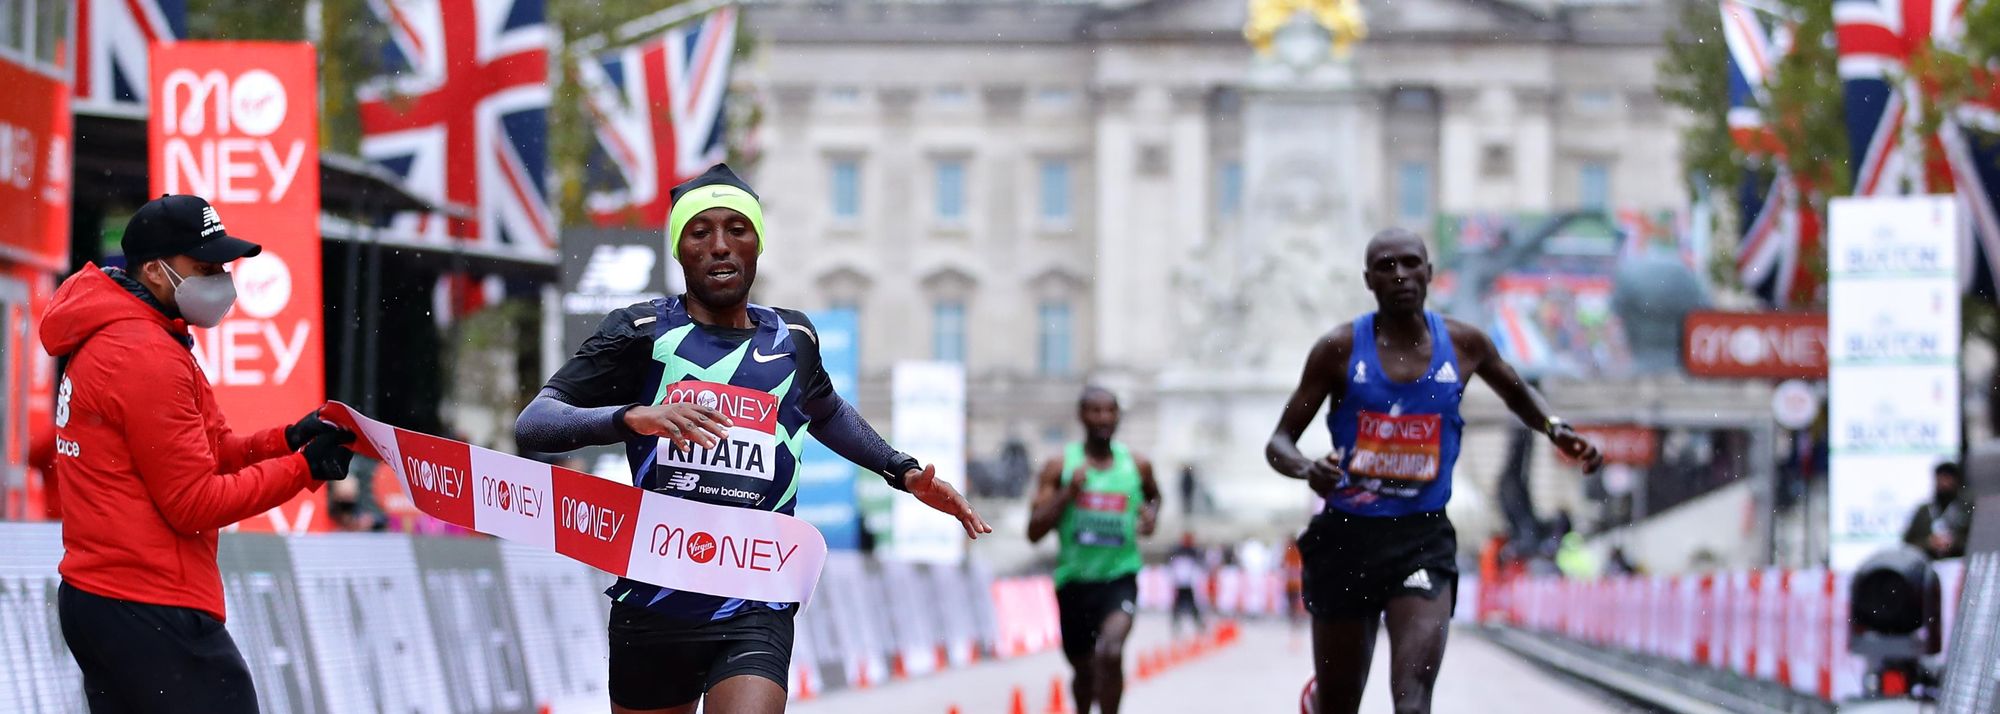 The man is fallible after all. Eliud Kipchoge’s reign of invincibility came to a crushing end with an eighth-place finish at the Virgin Money London Marathon, a World Athletics Platinum Label race, as Ethiopia’s Shura Kitata won a dramatic, last-gasp sprint to take the honours in the men’s race.